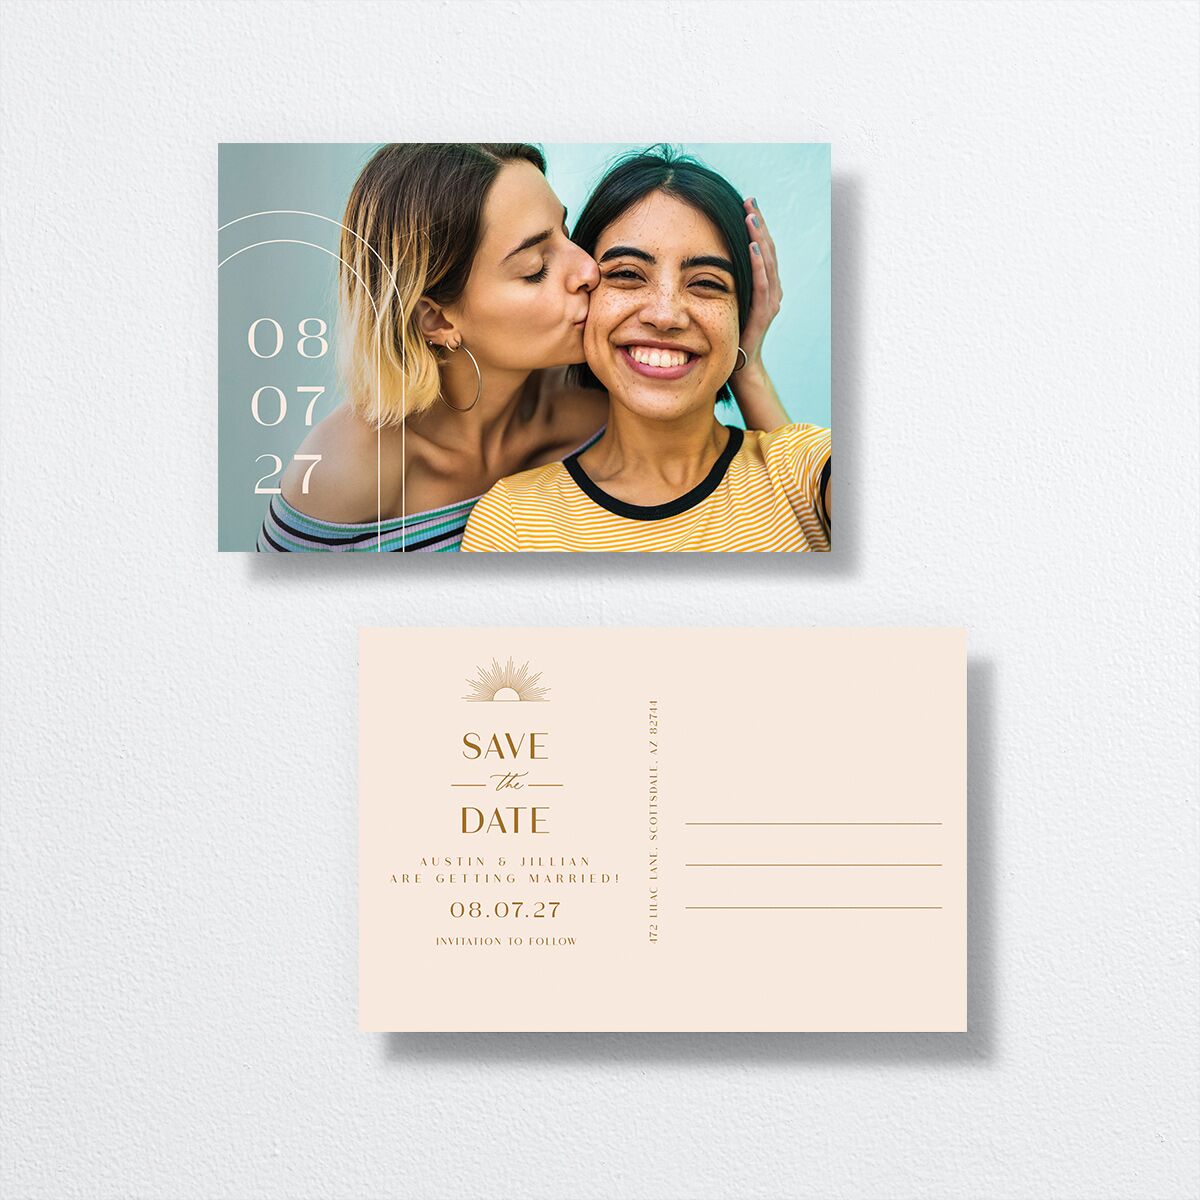 Modern Romantic Save The Date Postcards front-and-back